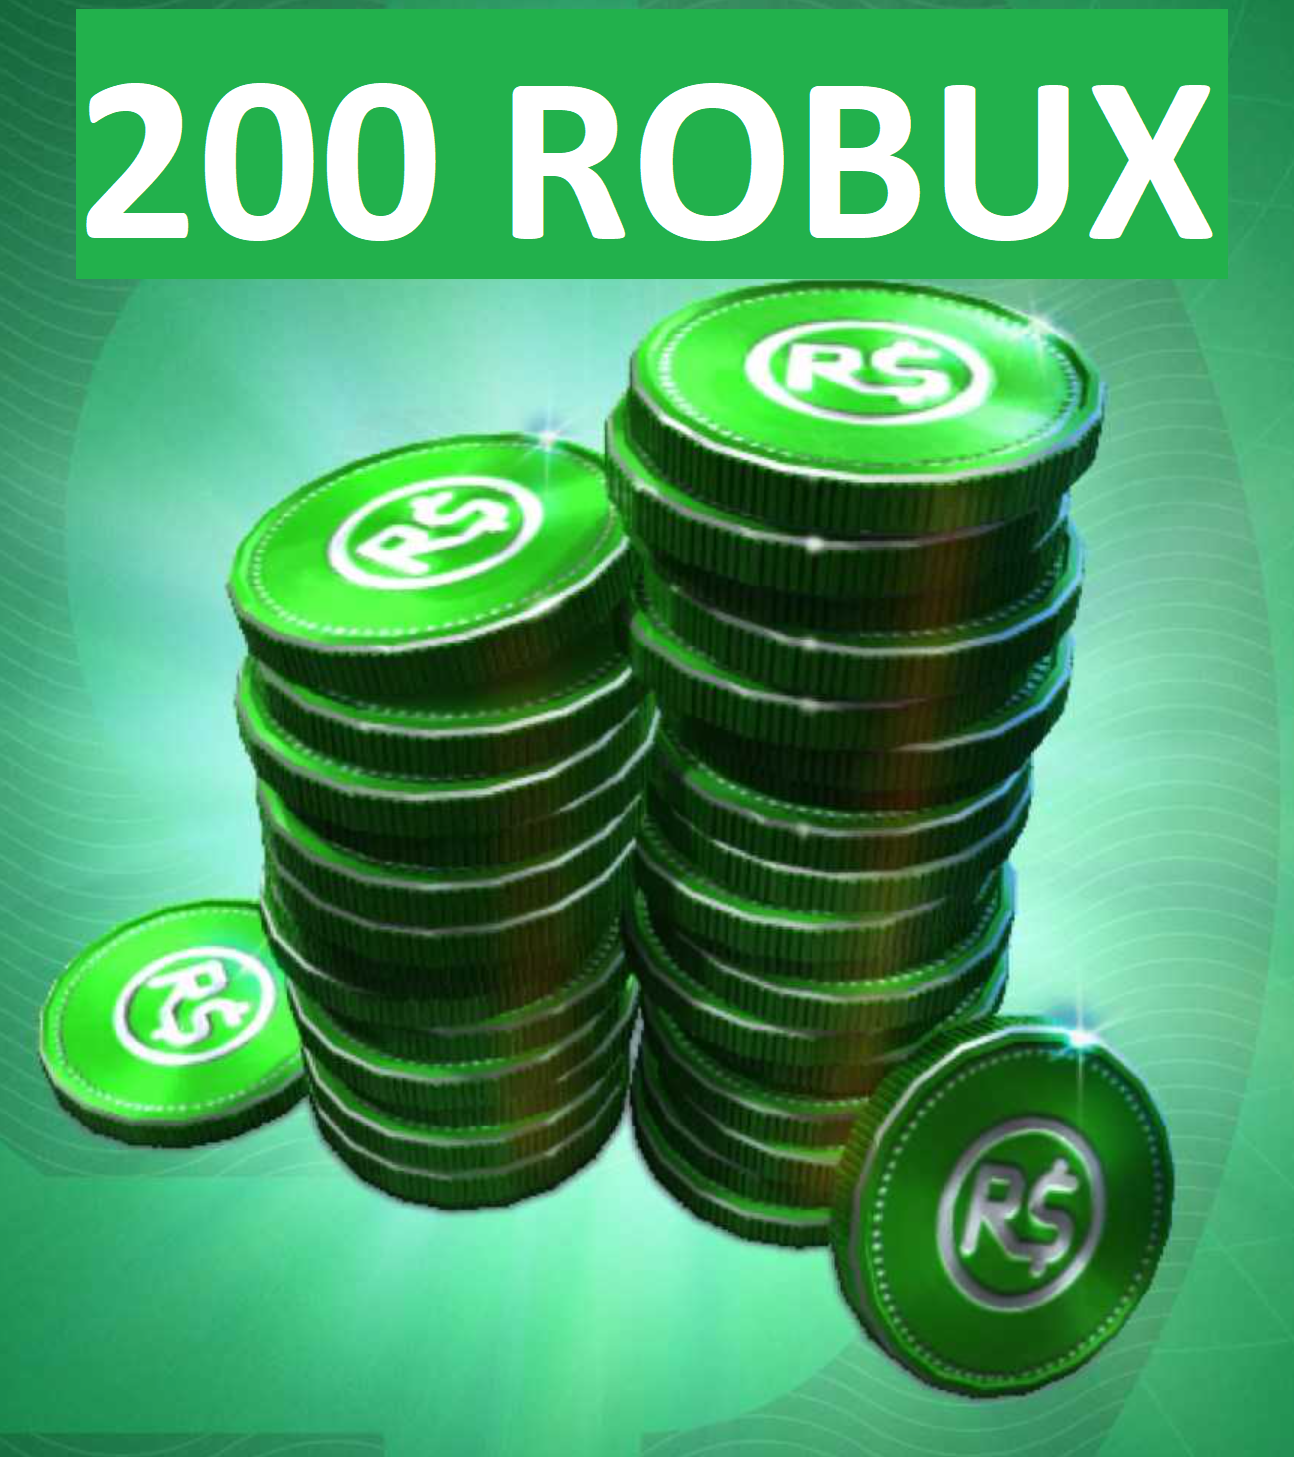 Buy Roblox Gift Card 200 Robux Global And Download - roblox gift card 200